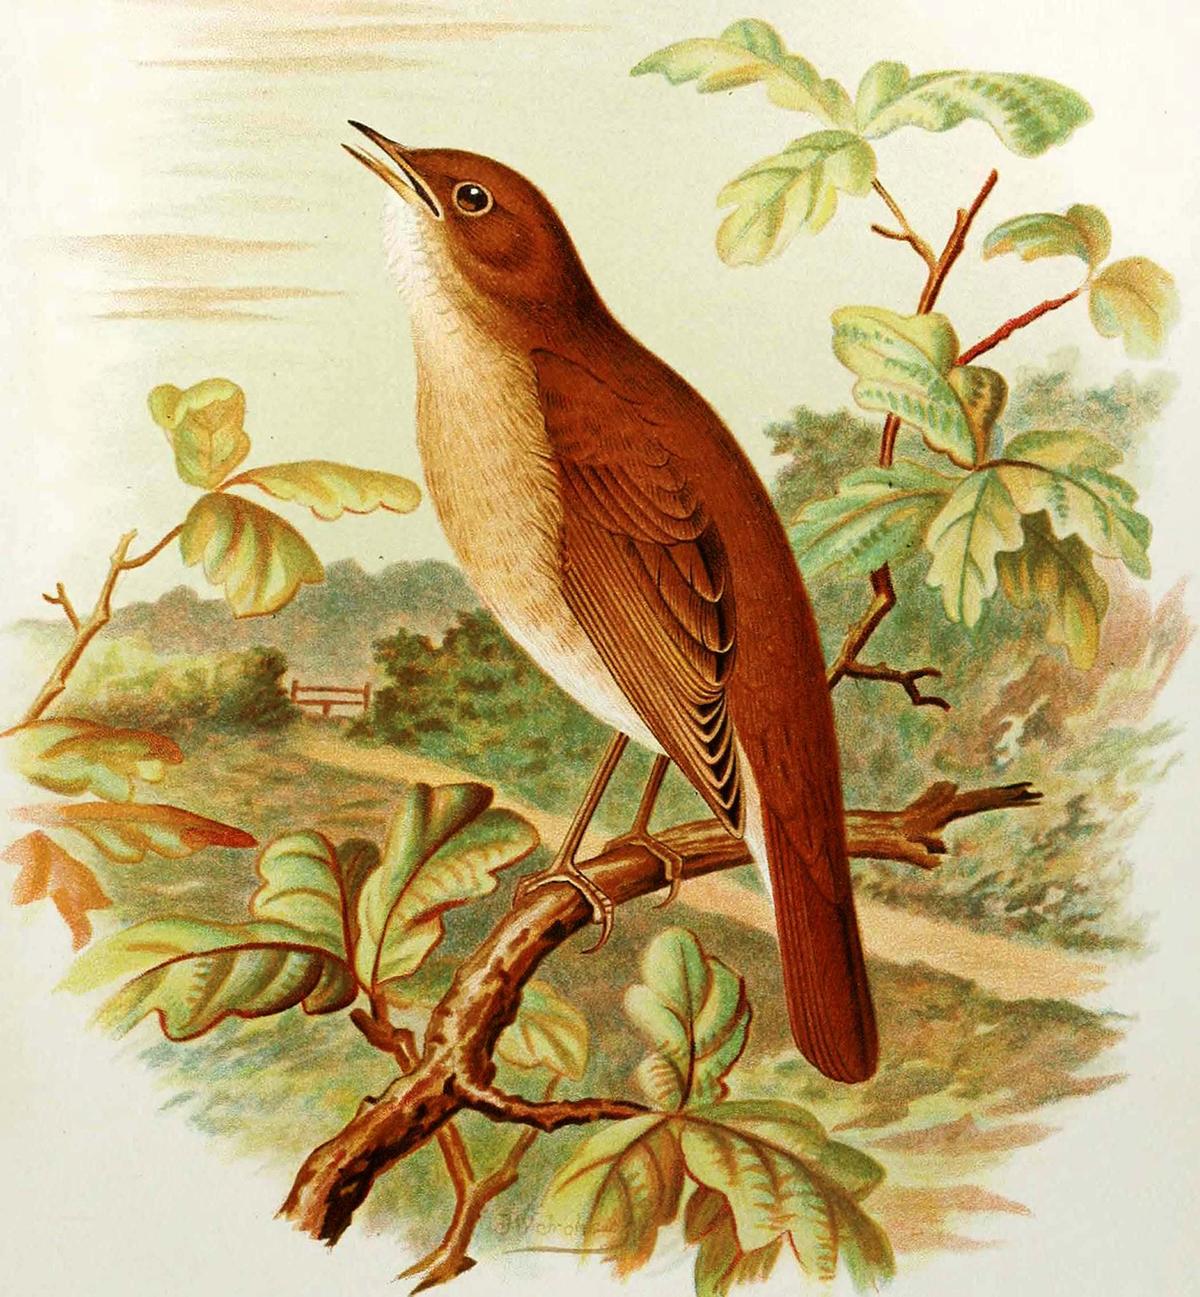 The nightingale becomes a symbol of immortal beauty in Keats's poem. An illustration of a common nightingale, 1907, by Arthur G. Butler. (Public Domain)